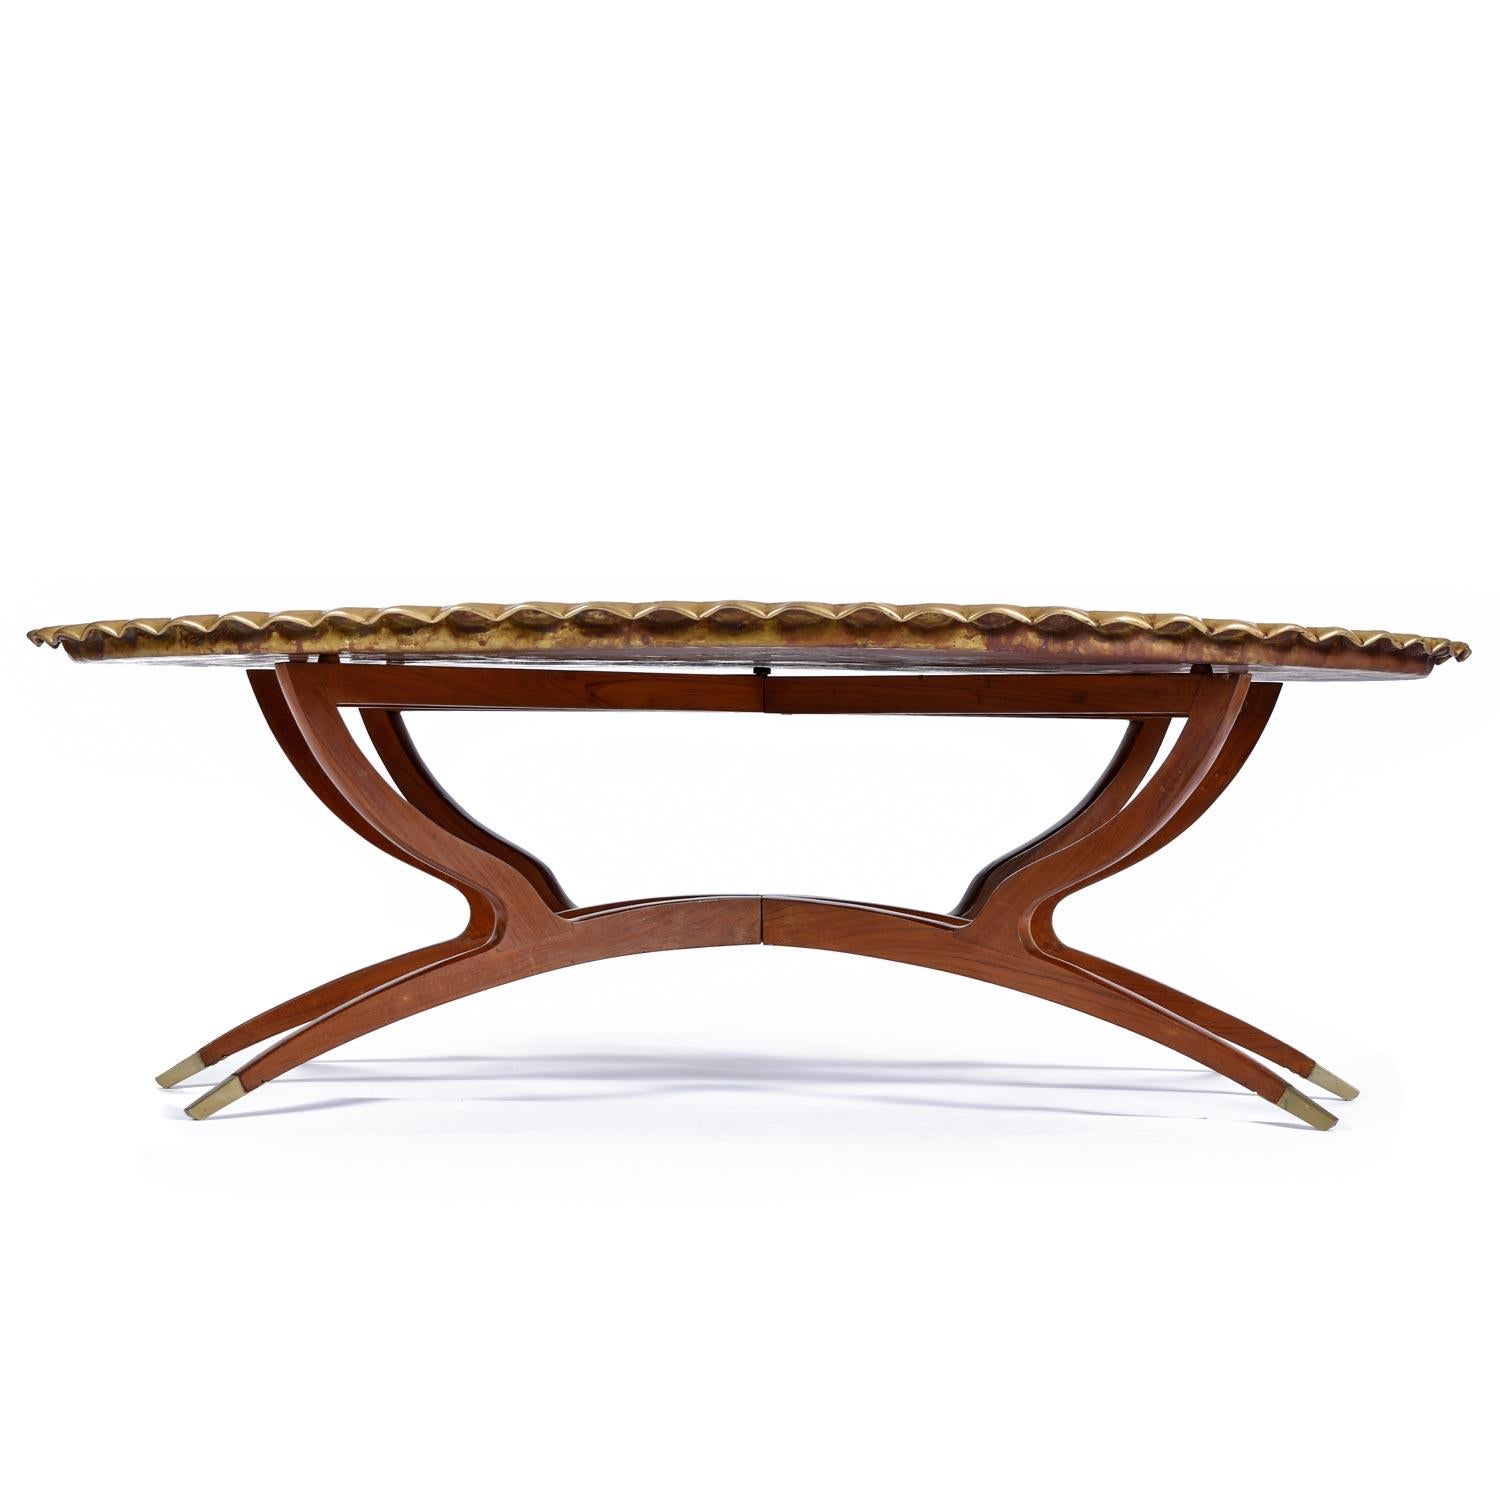 Mix in a touch of exotic mysticism with this Bohemian coffee table from South Asia. This look dovetails nicely with a wide range of styles. A designers dream of versatility, practical function and stunning form. Hand-hammered nuggets of rippled